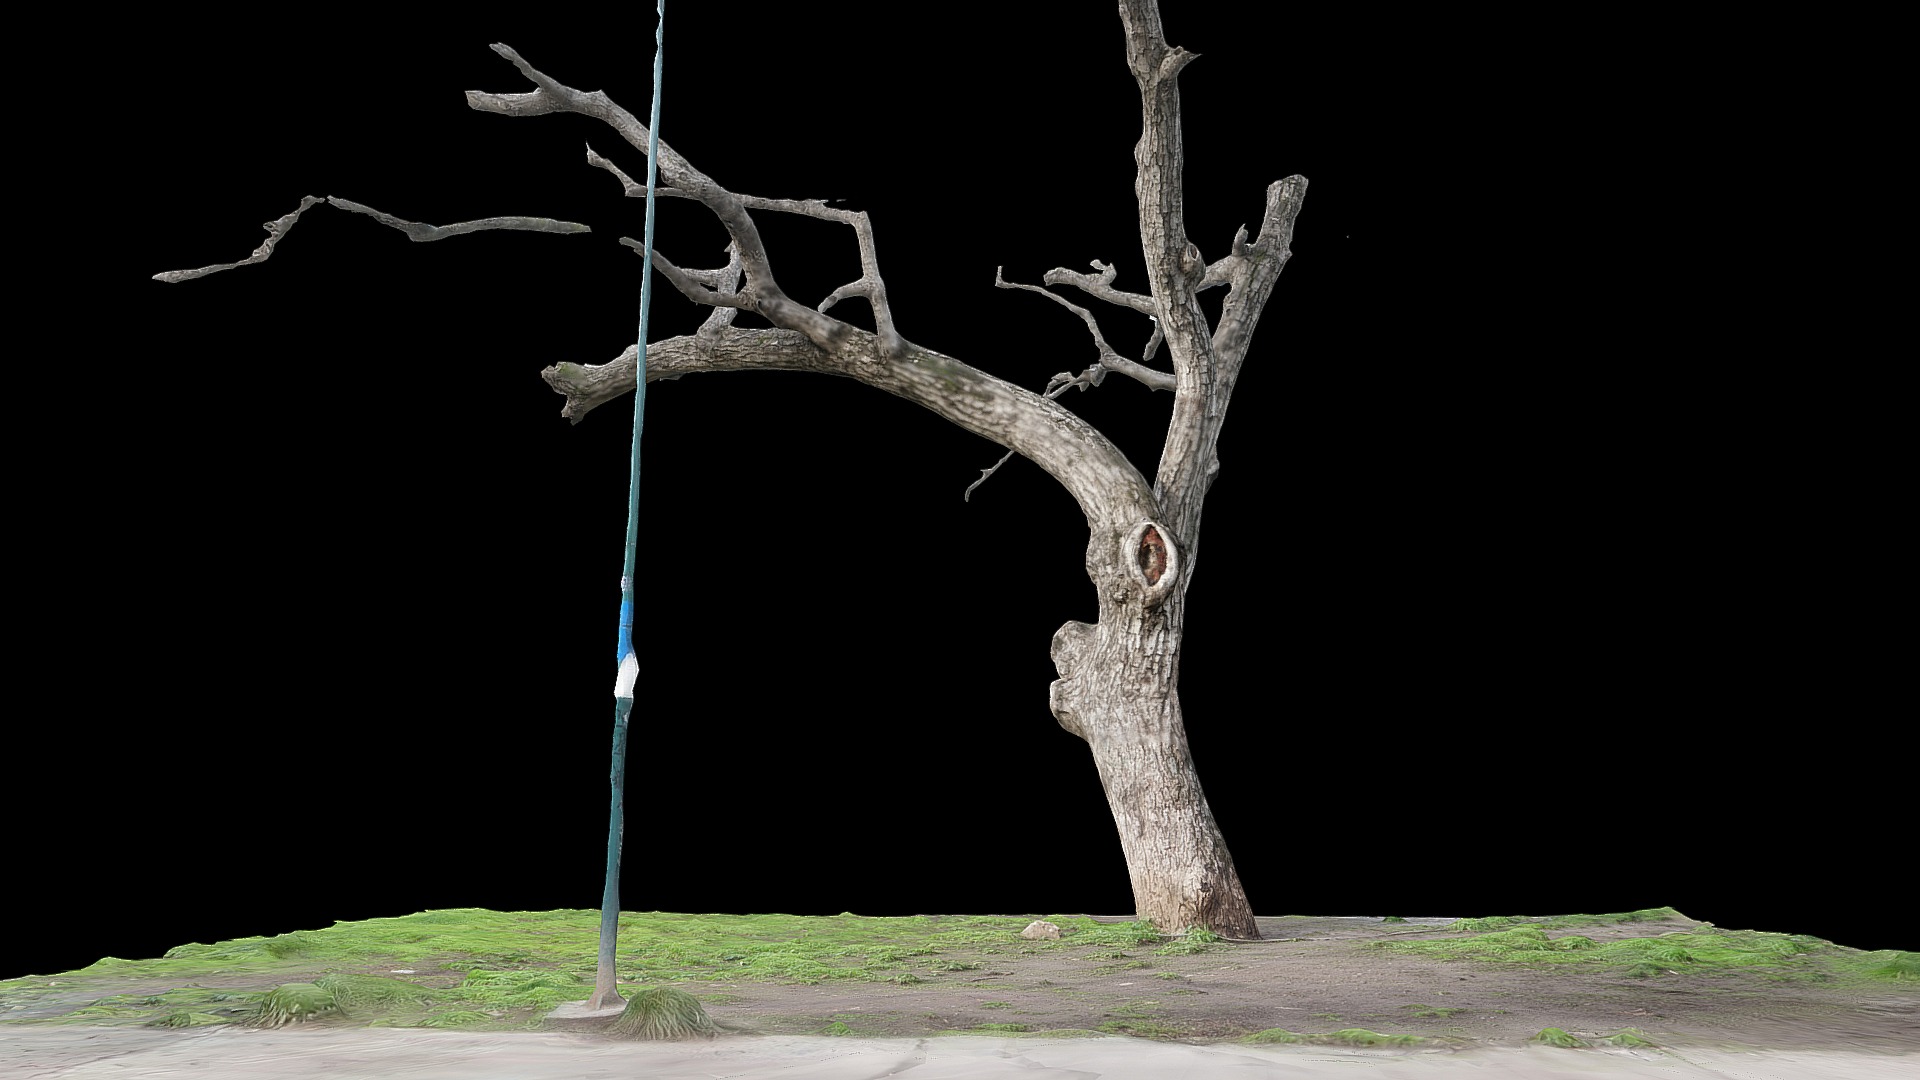 3D model 2017-07 – Santiago – Arbol 22 - This is a 3D model of the 2017-07 - Santiago - Arbol 22. The 3D model is about a tree with branches and a blue pole with a blue light.